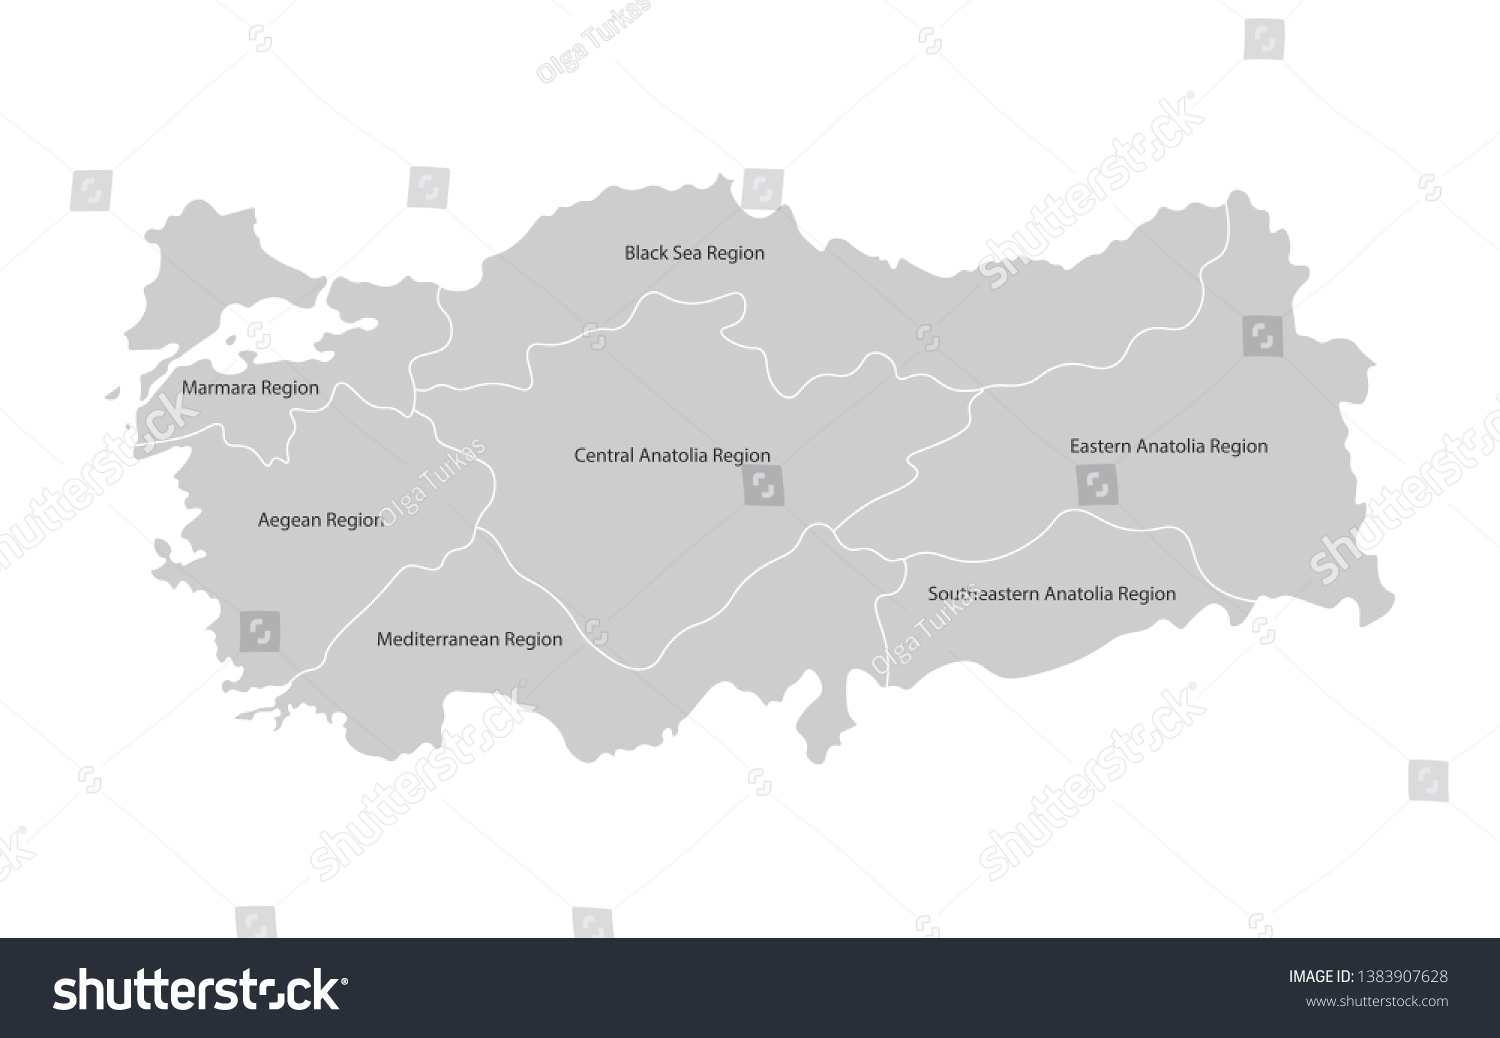 Vector isolated simplified map of Turkey regions. Borders and names of administrative divisions. Grey silhouettes, White background #1383907628